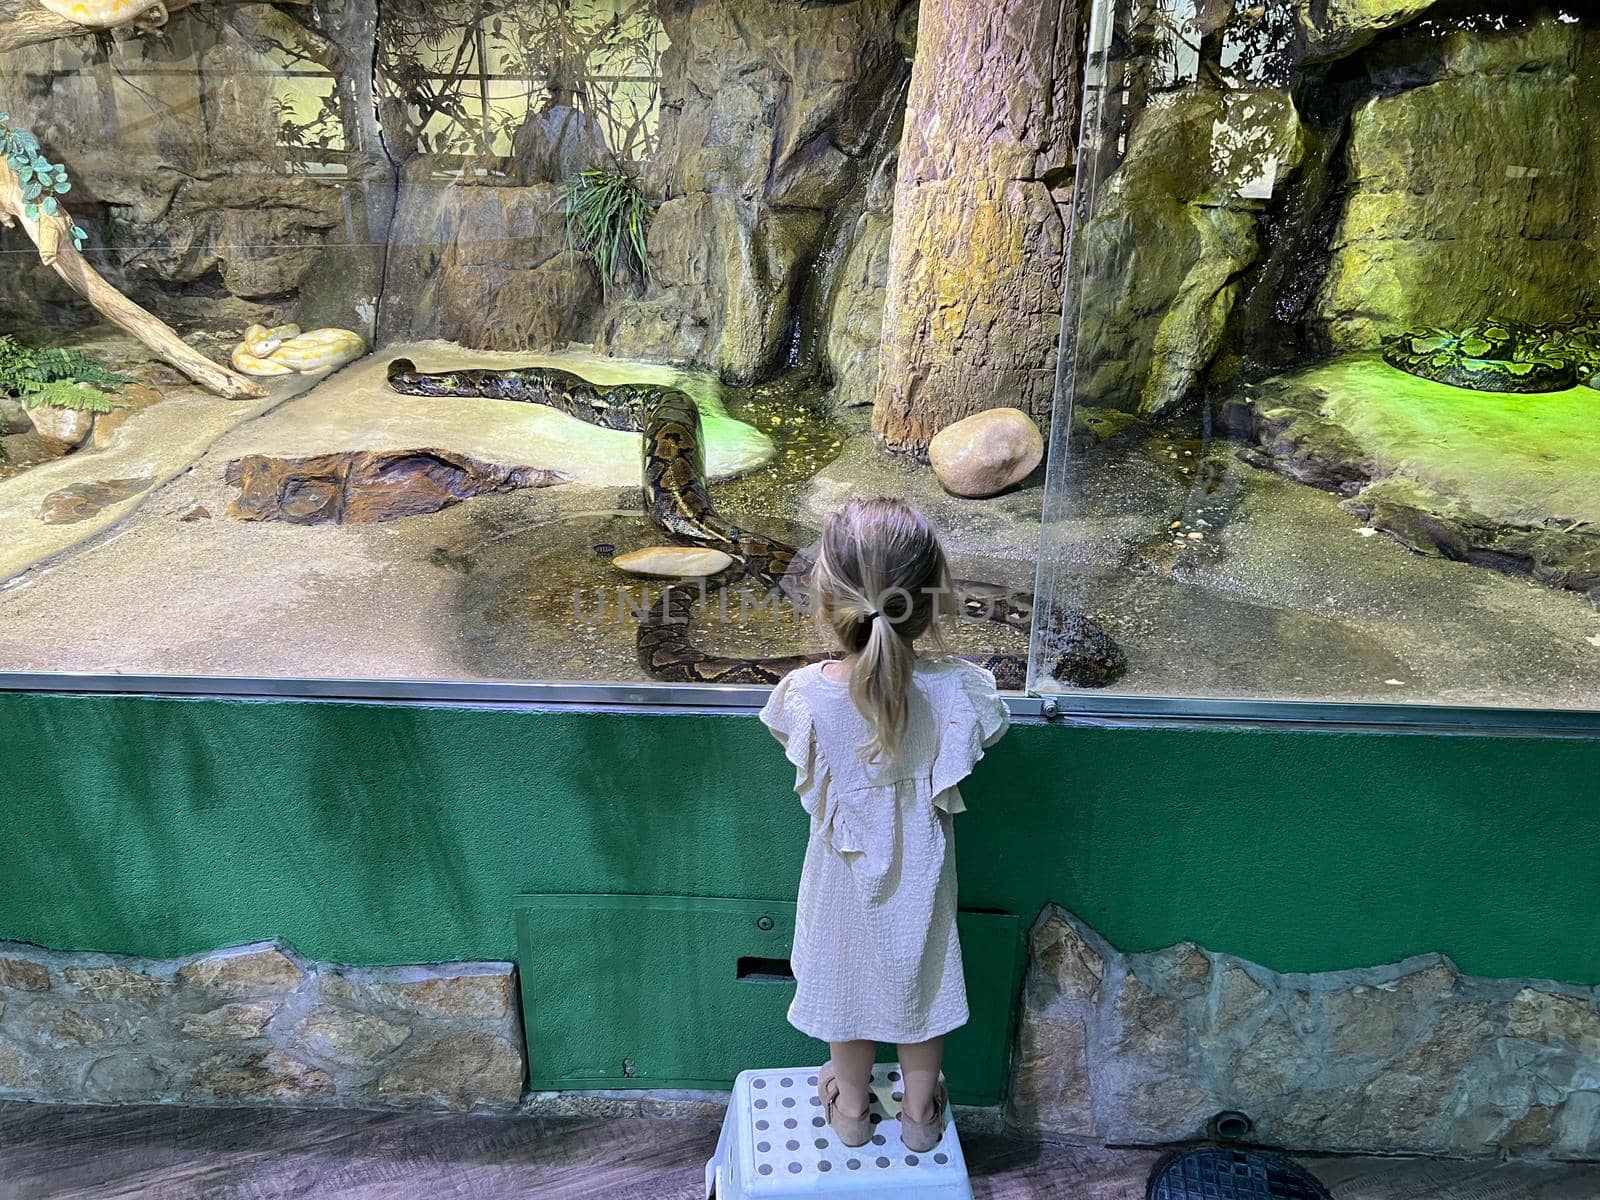 Little girl looks through the glass at a reticulated python in a terrarium by Nadtochiy